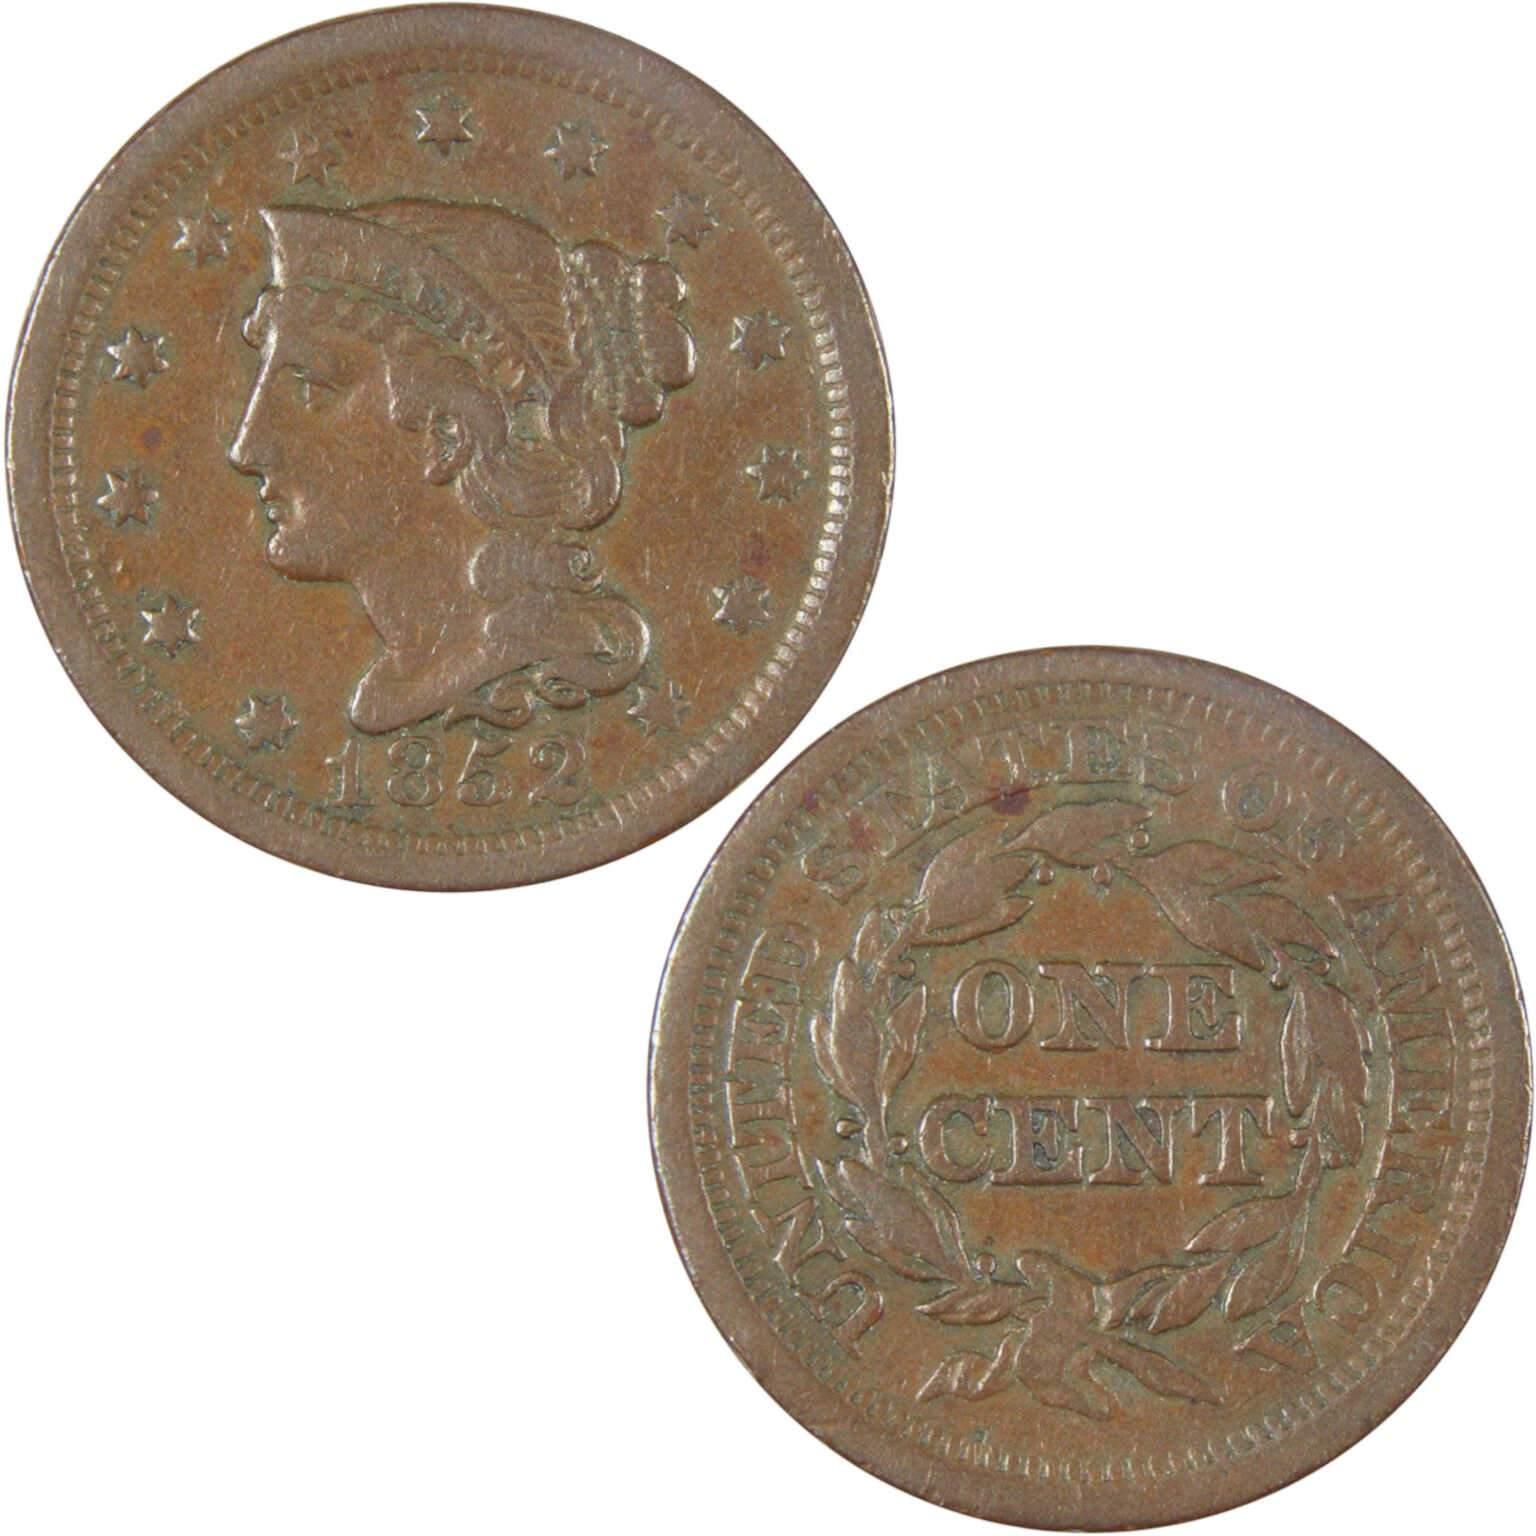 1852 Braided Hair Large Cent VF Very Fine Copper Penny 1c US Type Coin